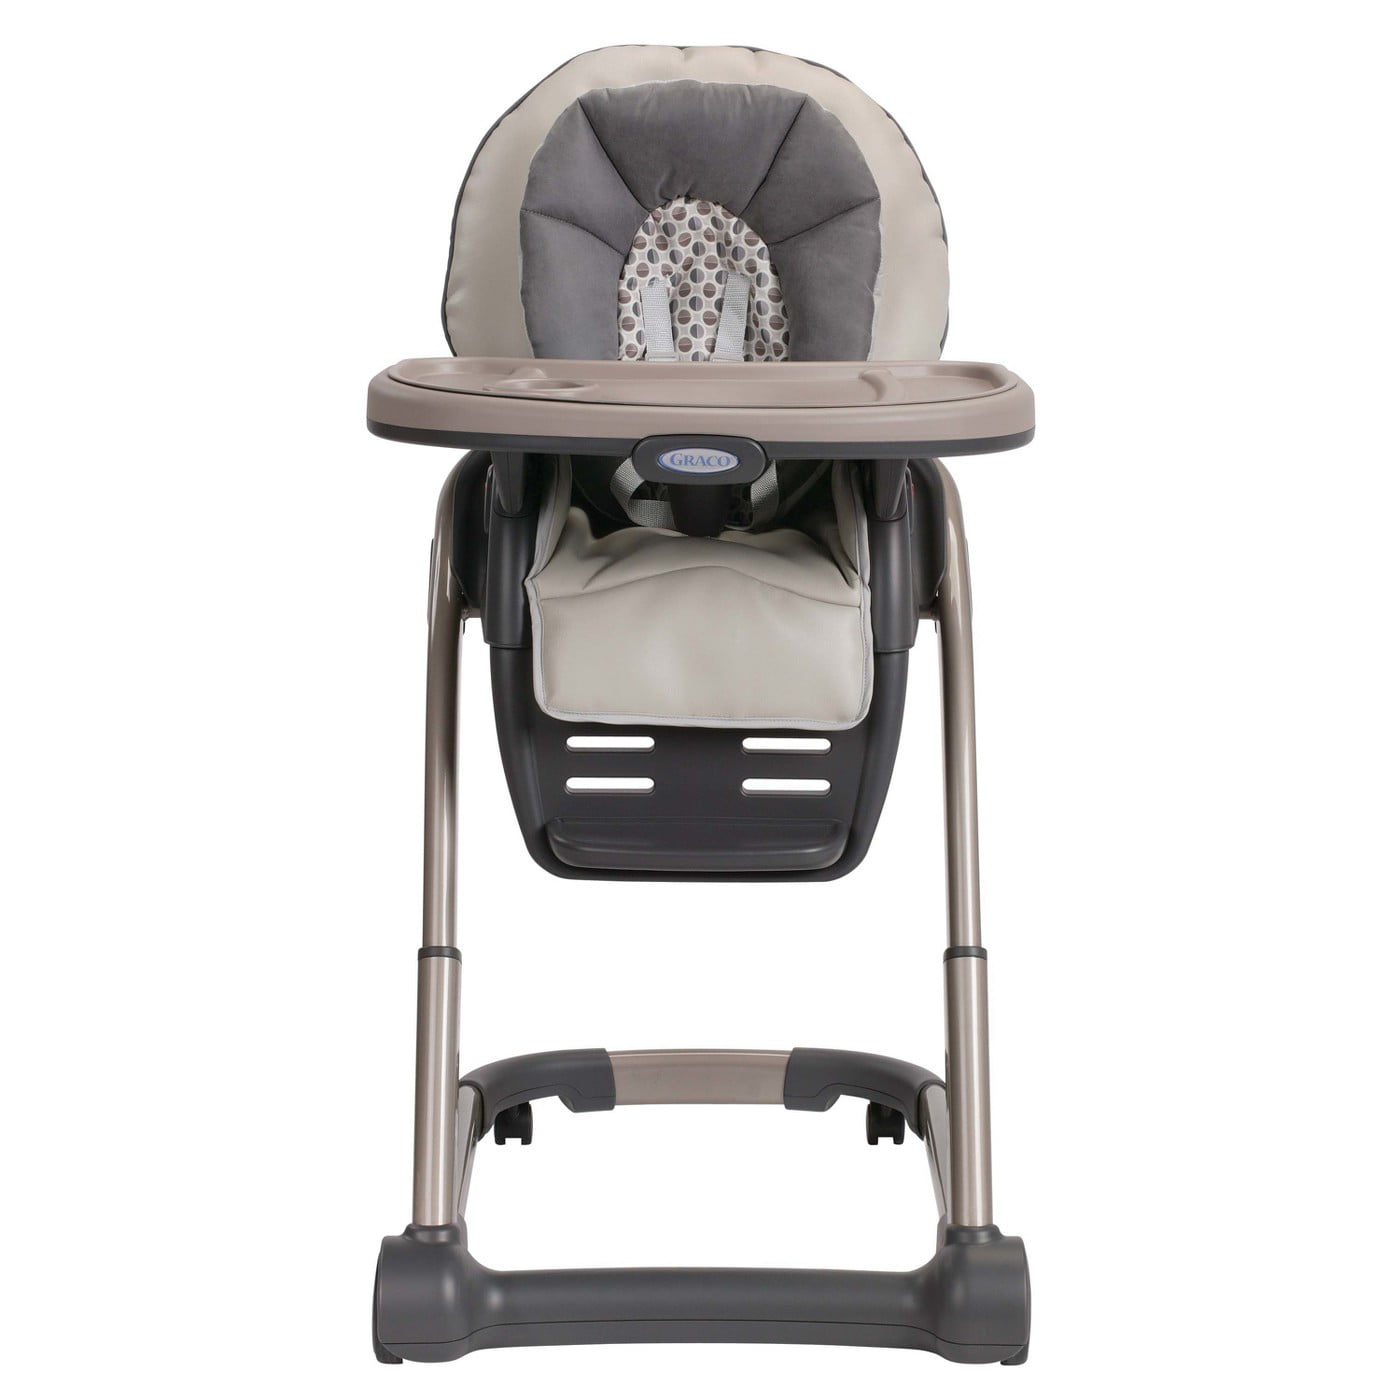 6 in 1 high chair